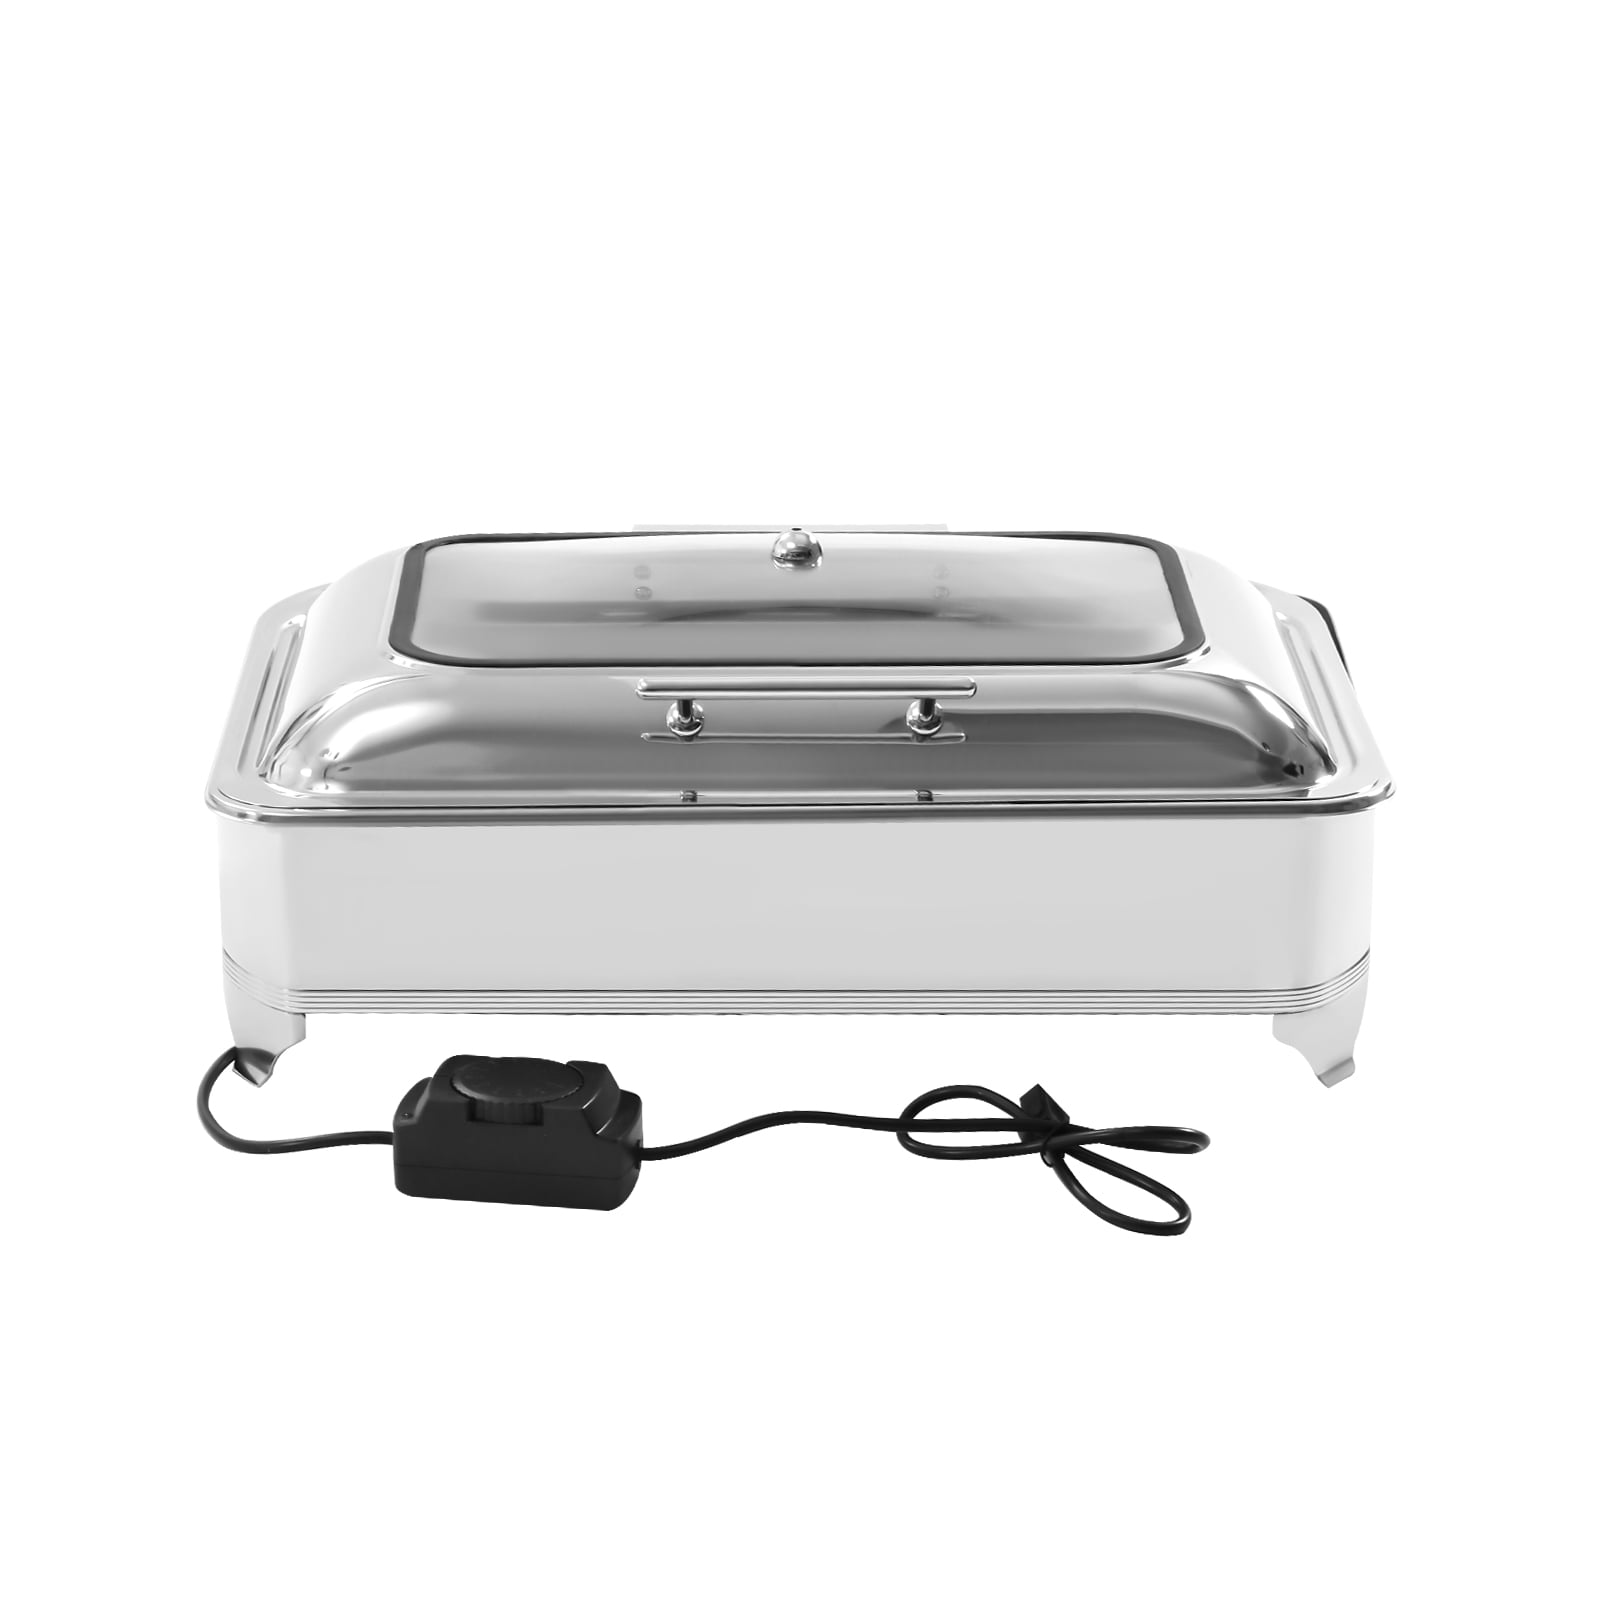 KFJZGZZ Food Warmers for Parties, Electric Chafing Dish Buffet Set with  Lids, Stainless Steel Catering Serve Chafer, 9L Commercial Buffet Servers